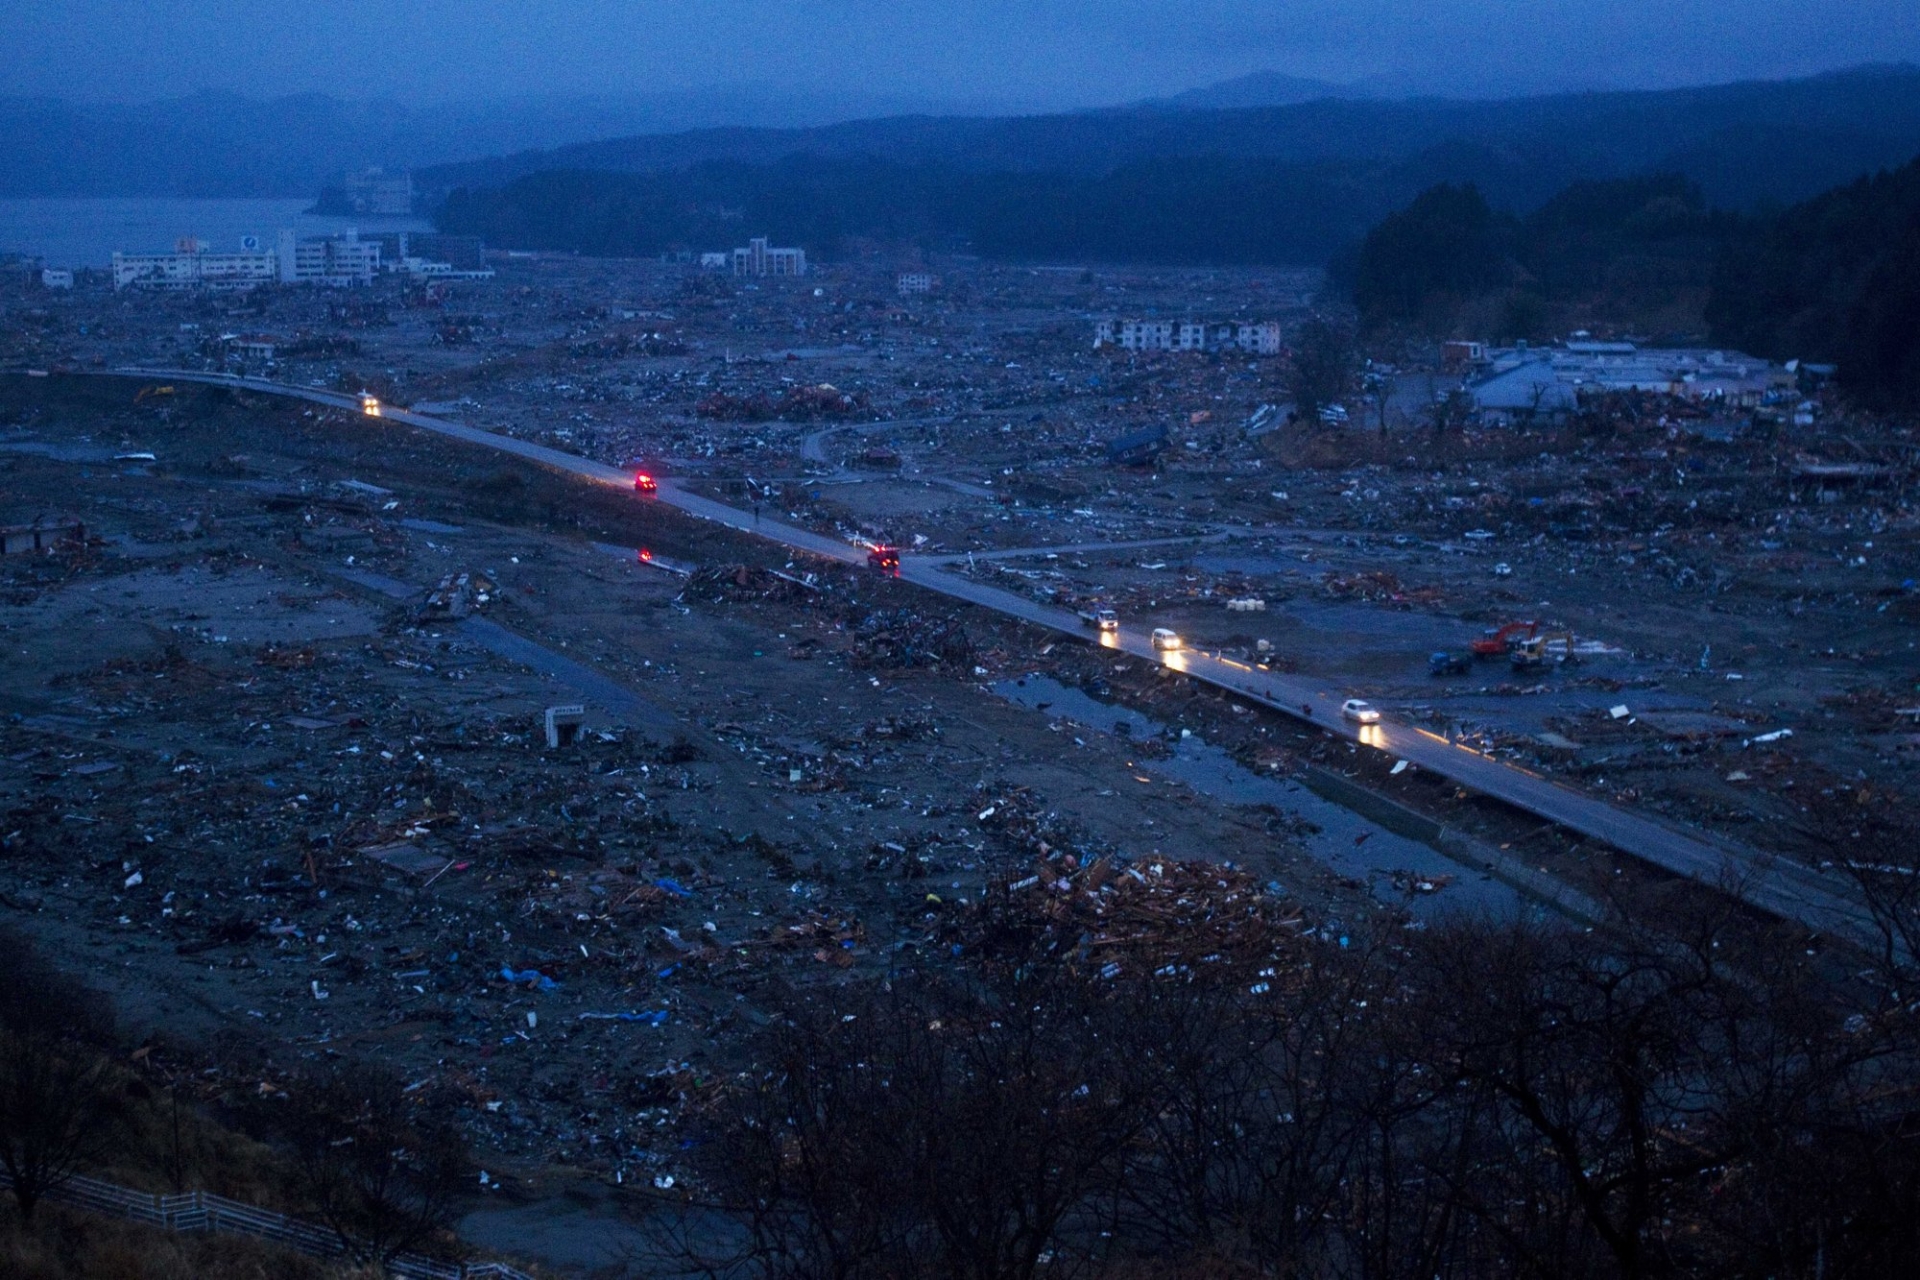 Japan a decade later after the tsunami